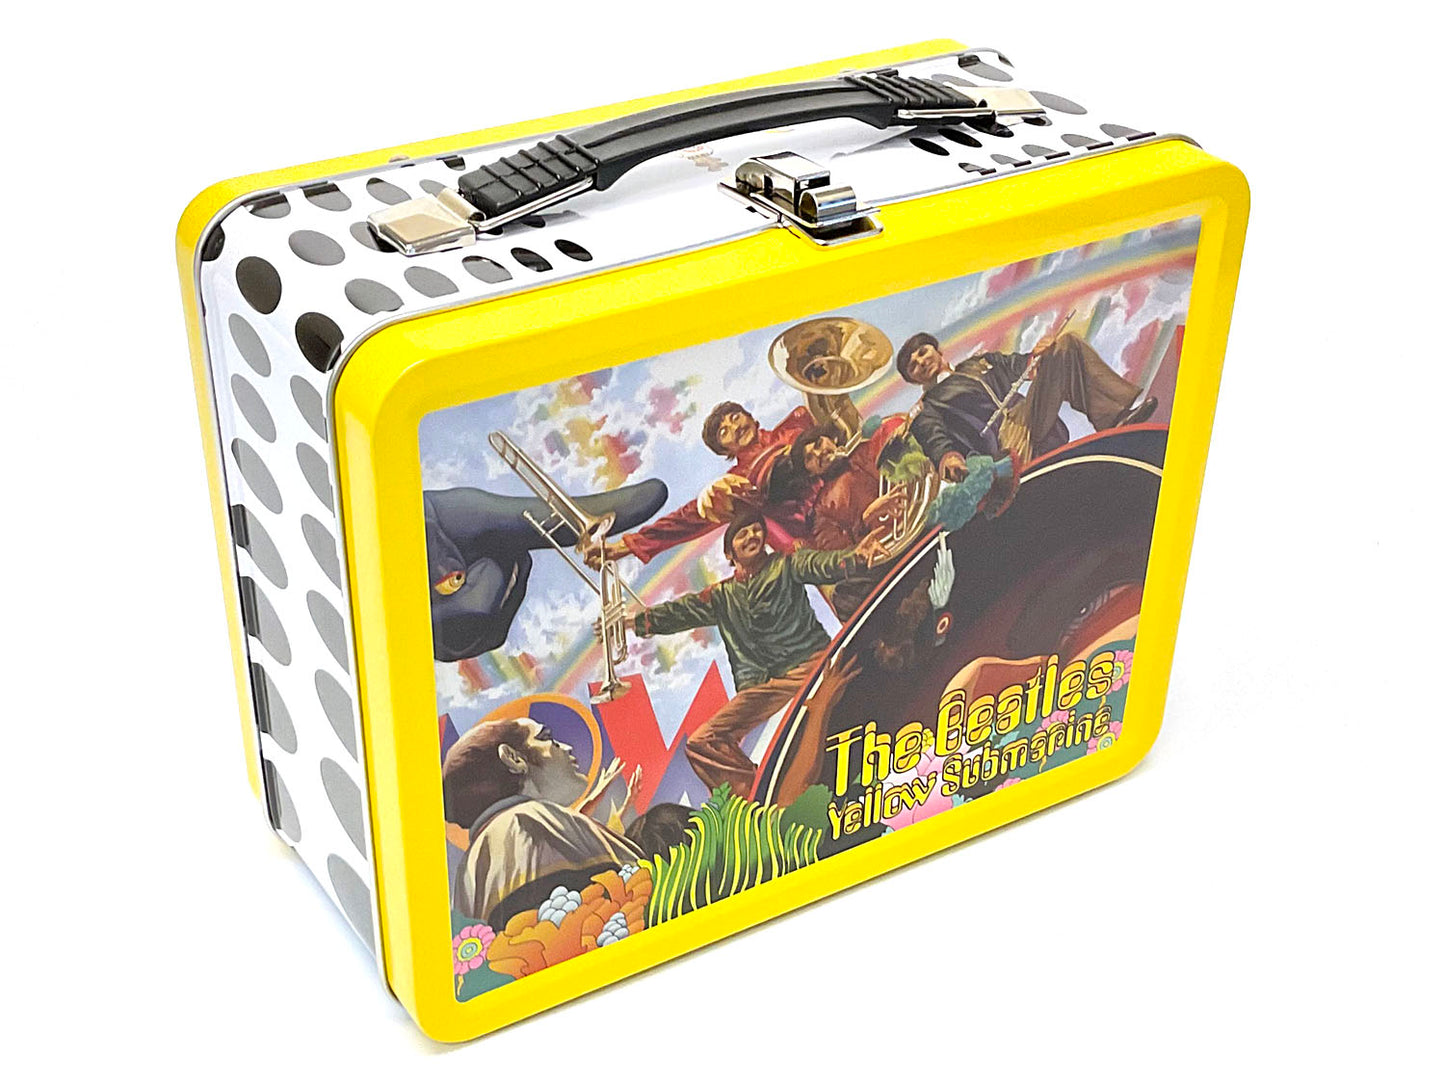 Lunch Box - The Beatles Yellow Submarine - front